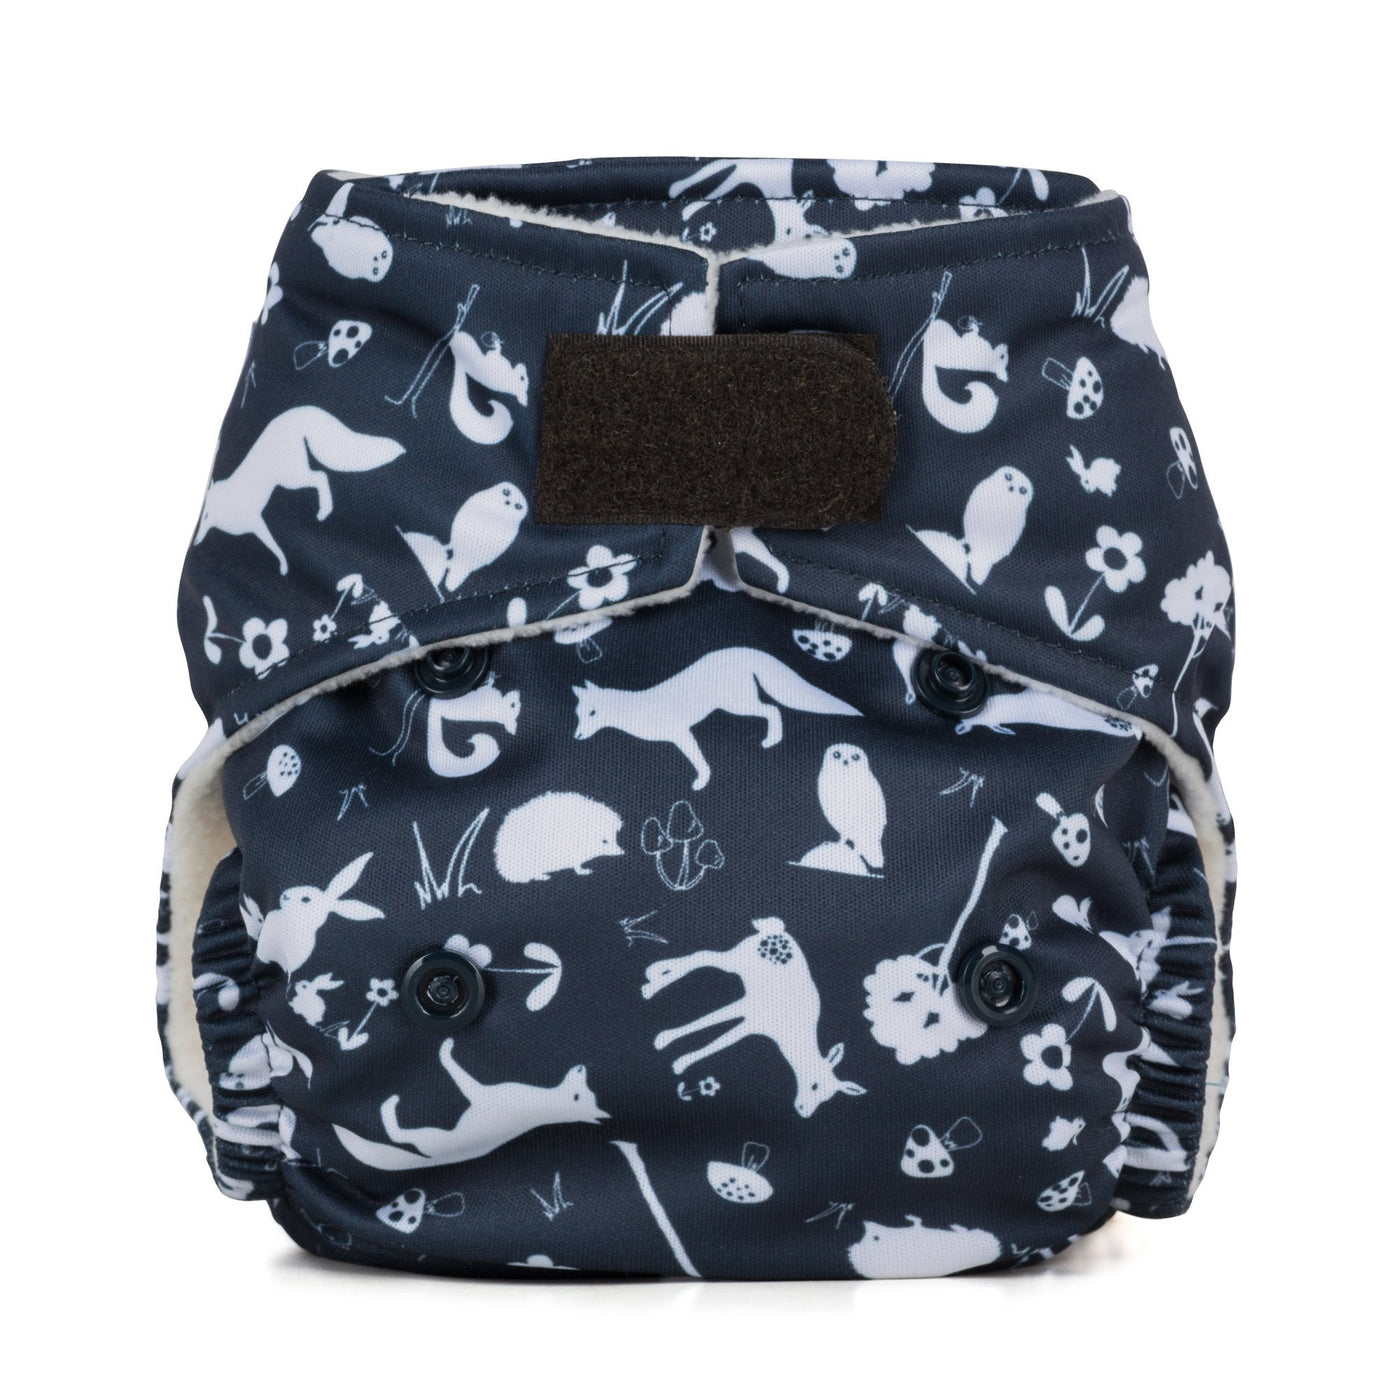 Baba + BooOne Size Reusable Nappy - PrintsColour: Dandelionreusable nappies all in one nappiesEarthlets